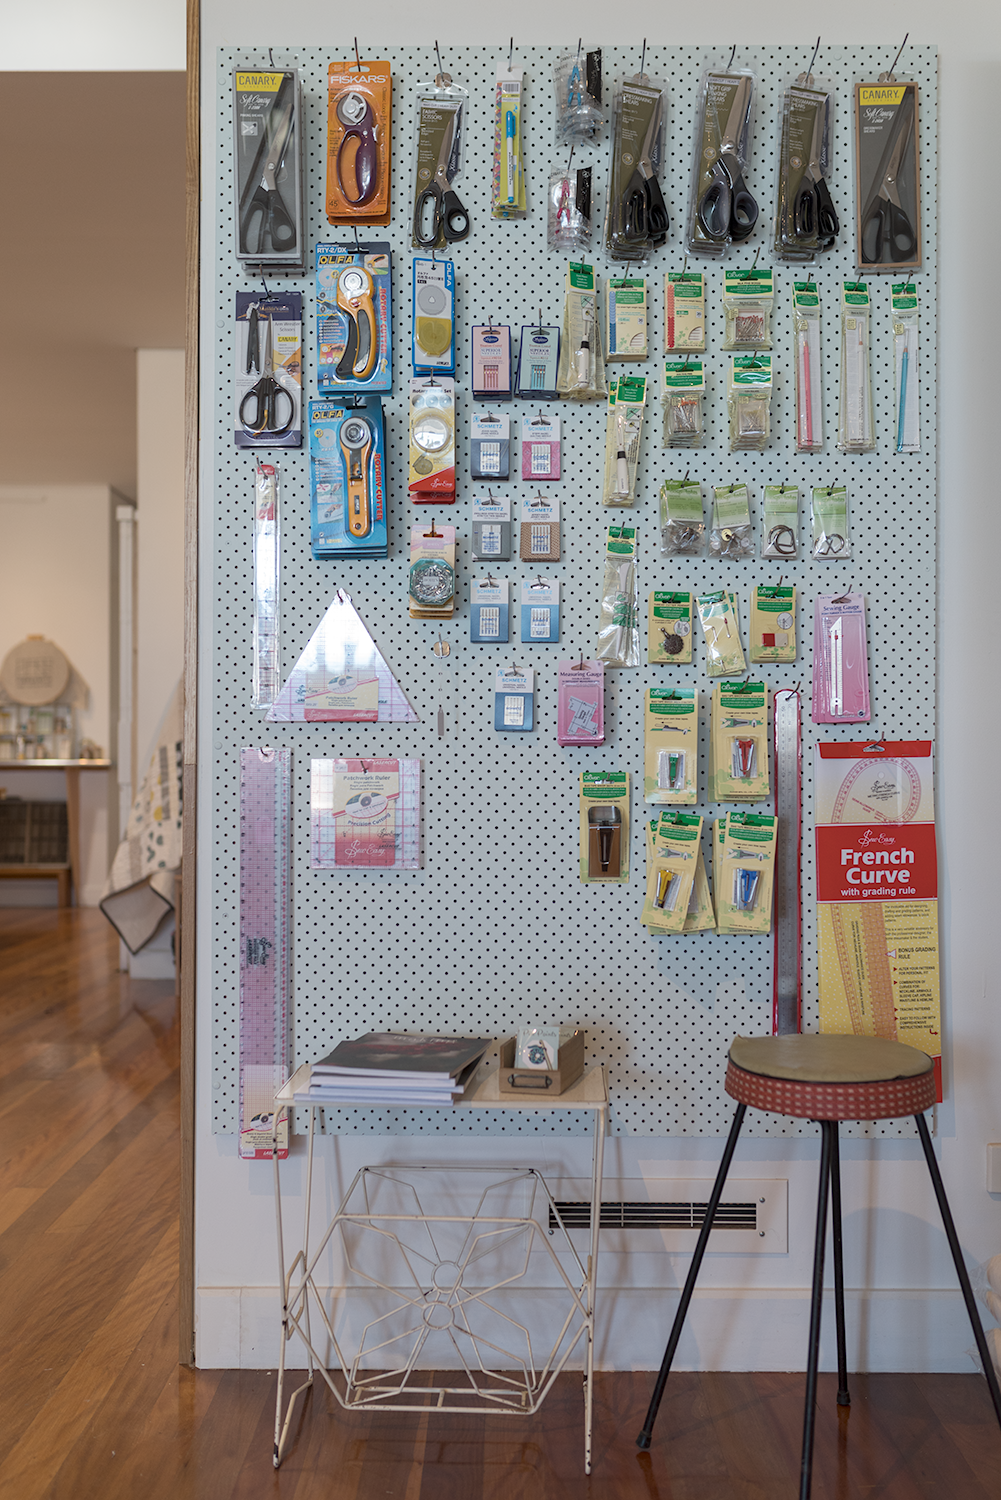  Pinboard of goodness, with lots of Clover products.&nbsp;Photo by Susan Fitzgerald. 